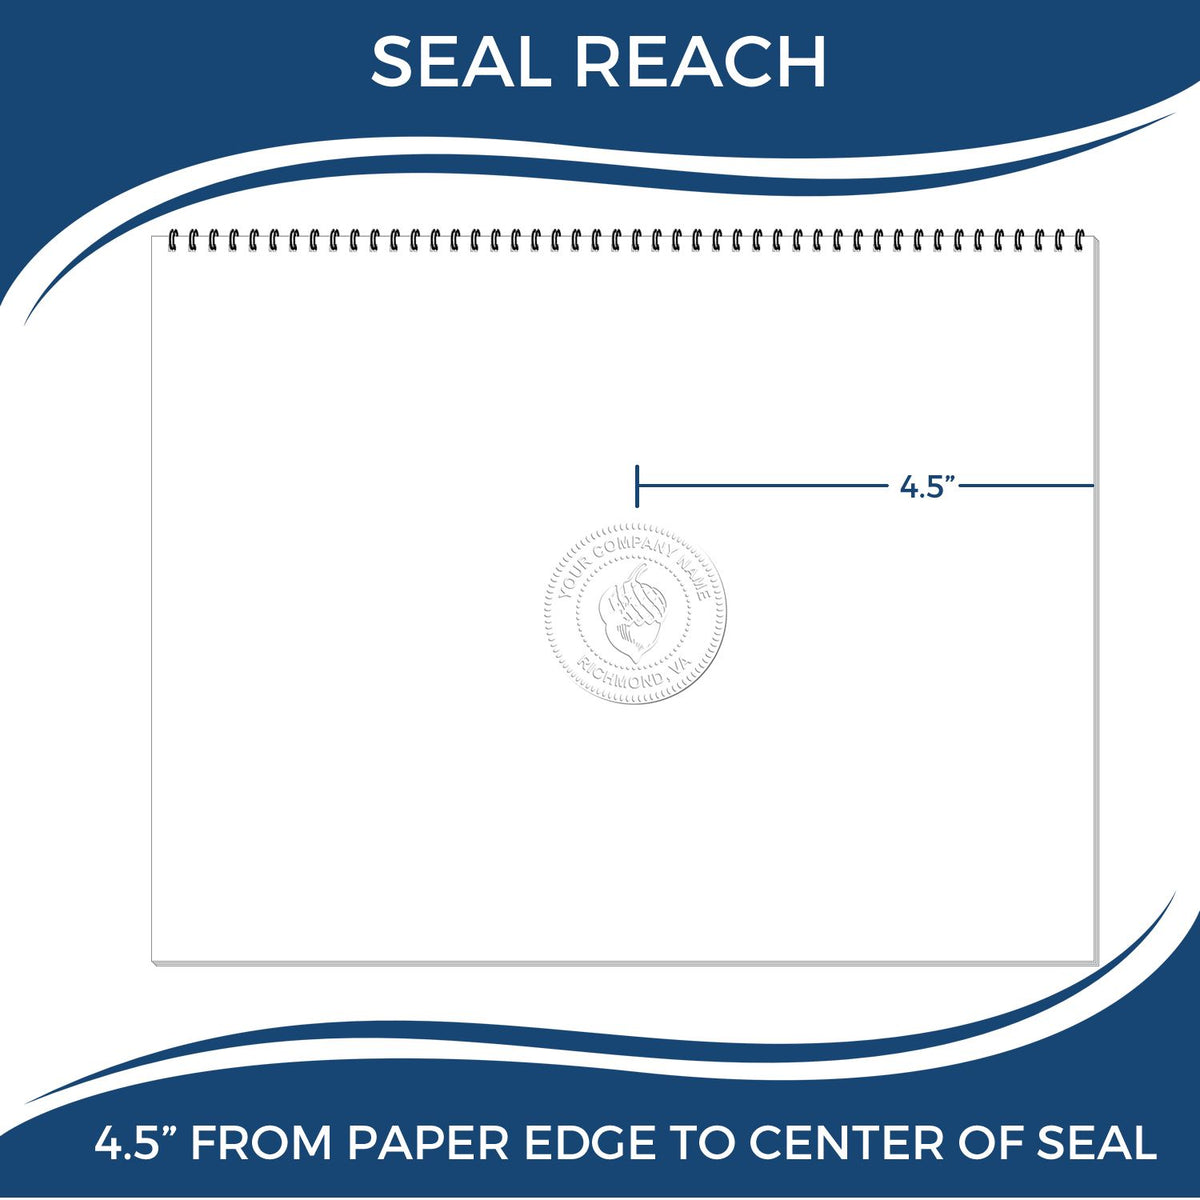 An infographic showing the seal reach which is represented by a ruler and a miniature seal image of the State of Indiana Extended Long Reach Engineer Seal